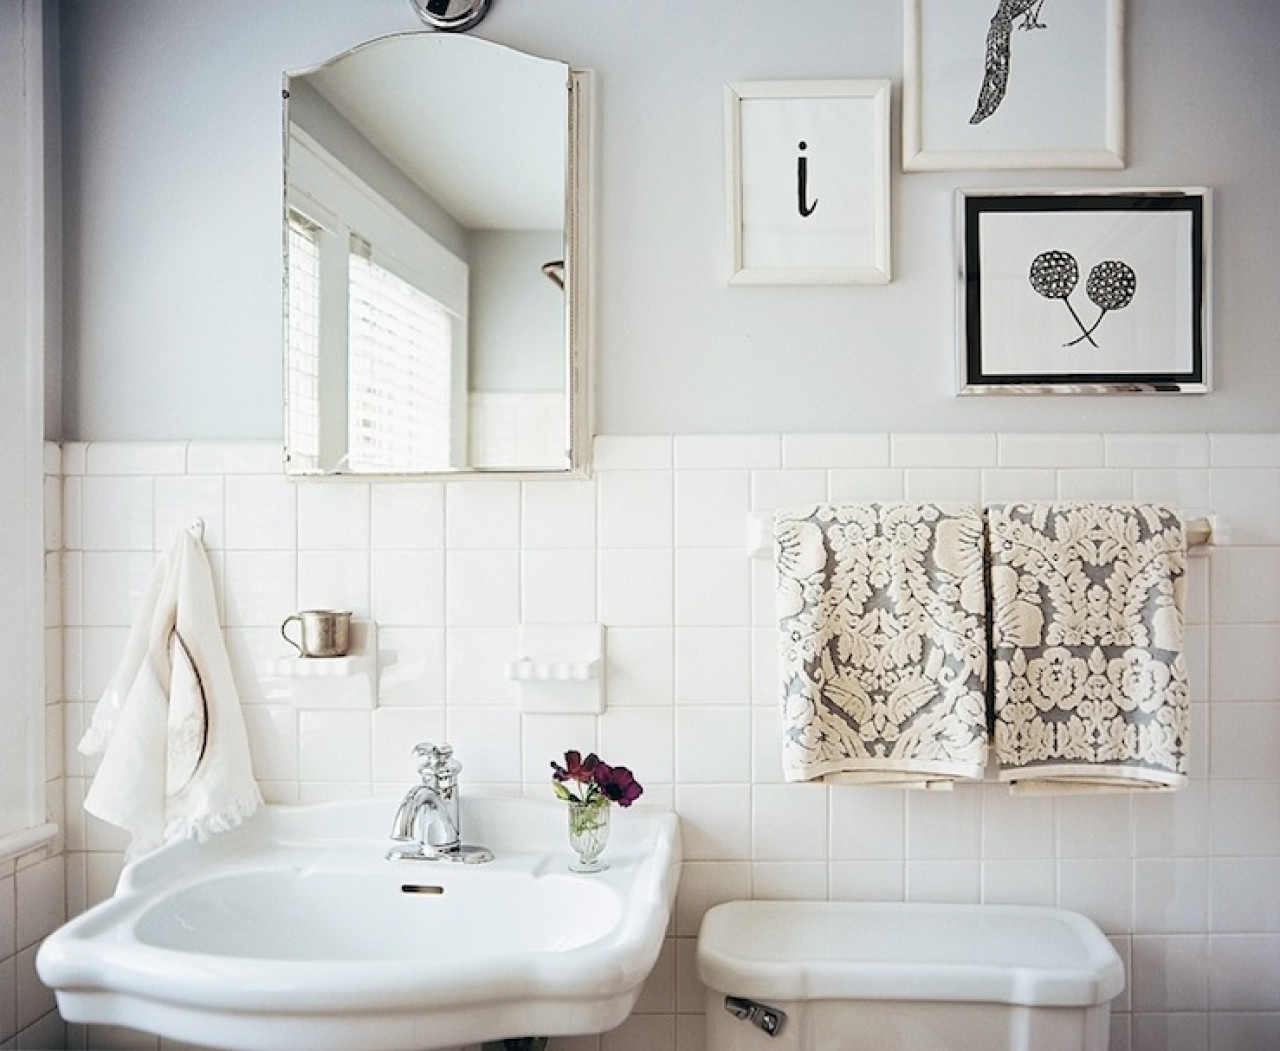 Covering Old Bathroom Tiles
 33 amazing pictures and ideas of old fashioned bathroom